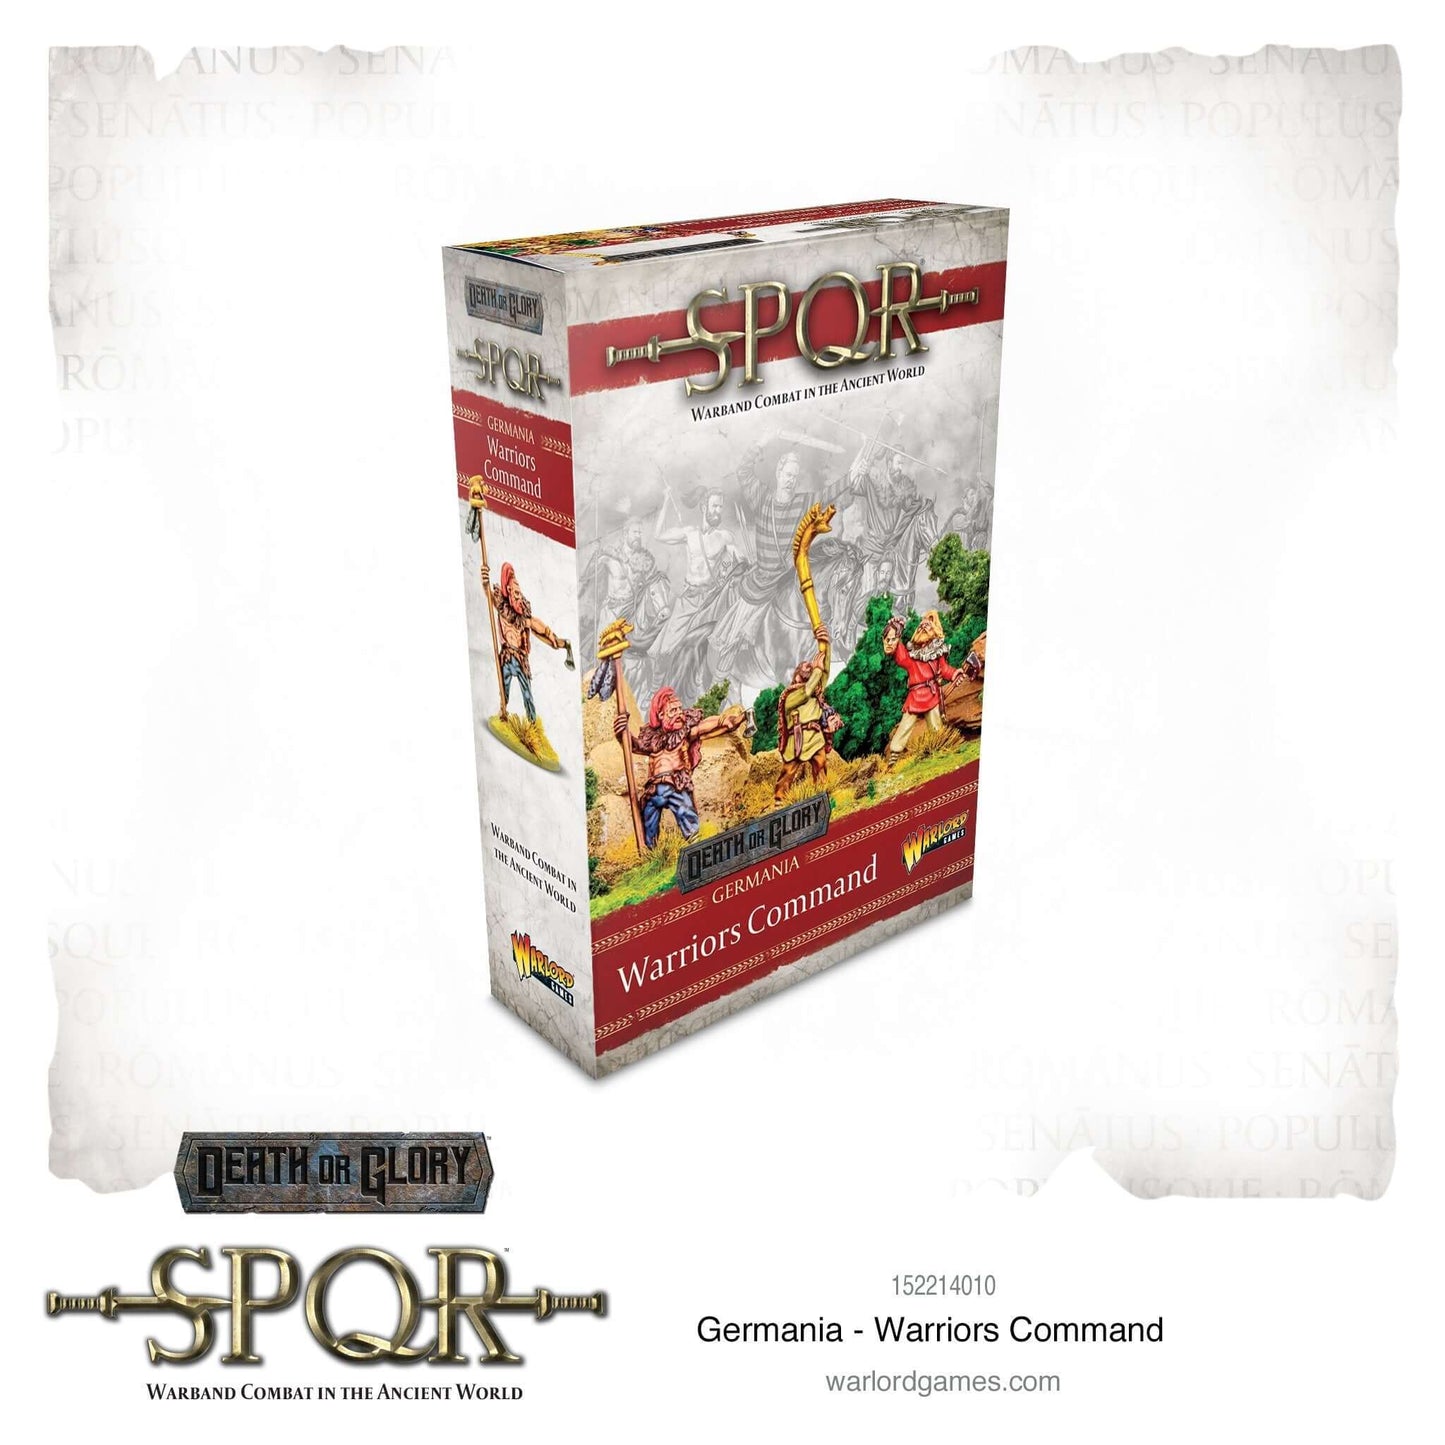 SPQR: Germania - Warriors Command by Warlord